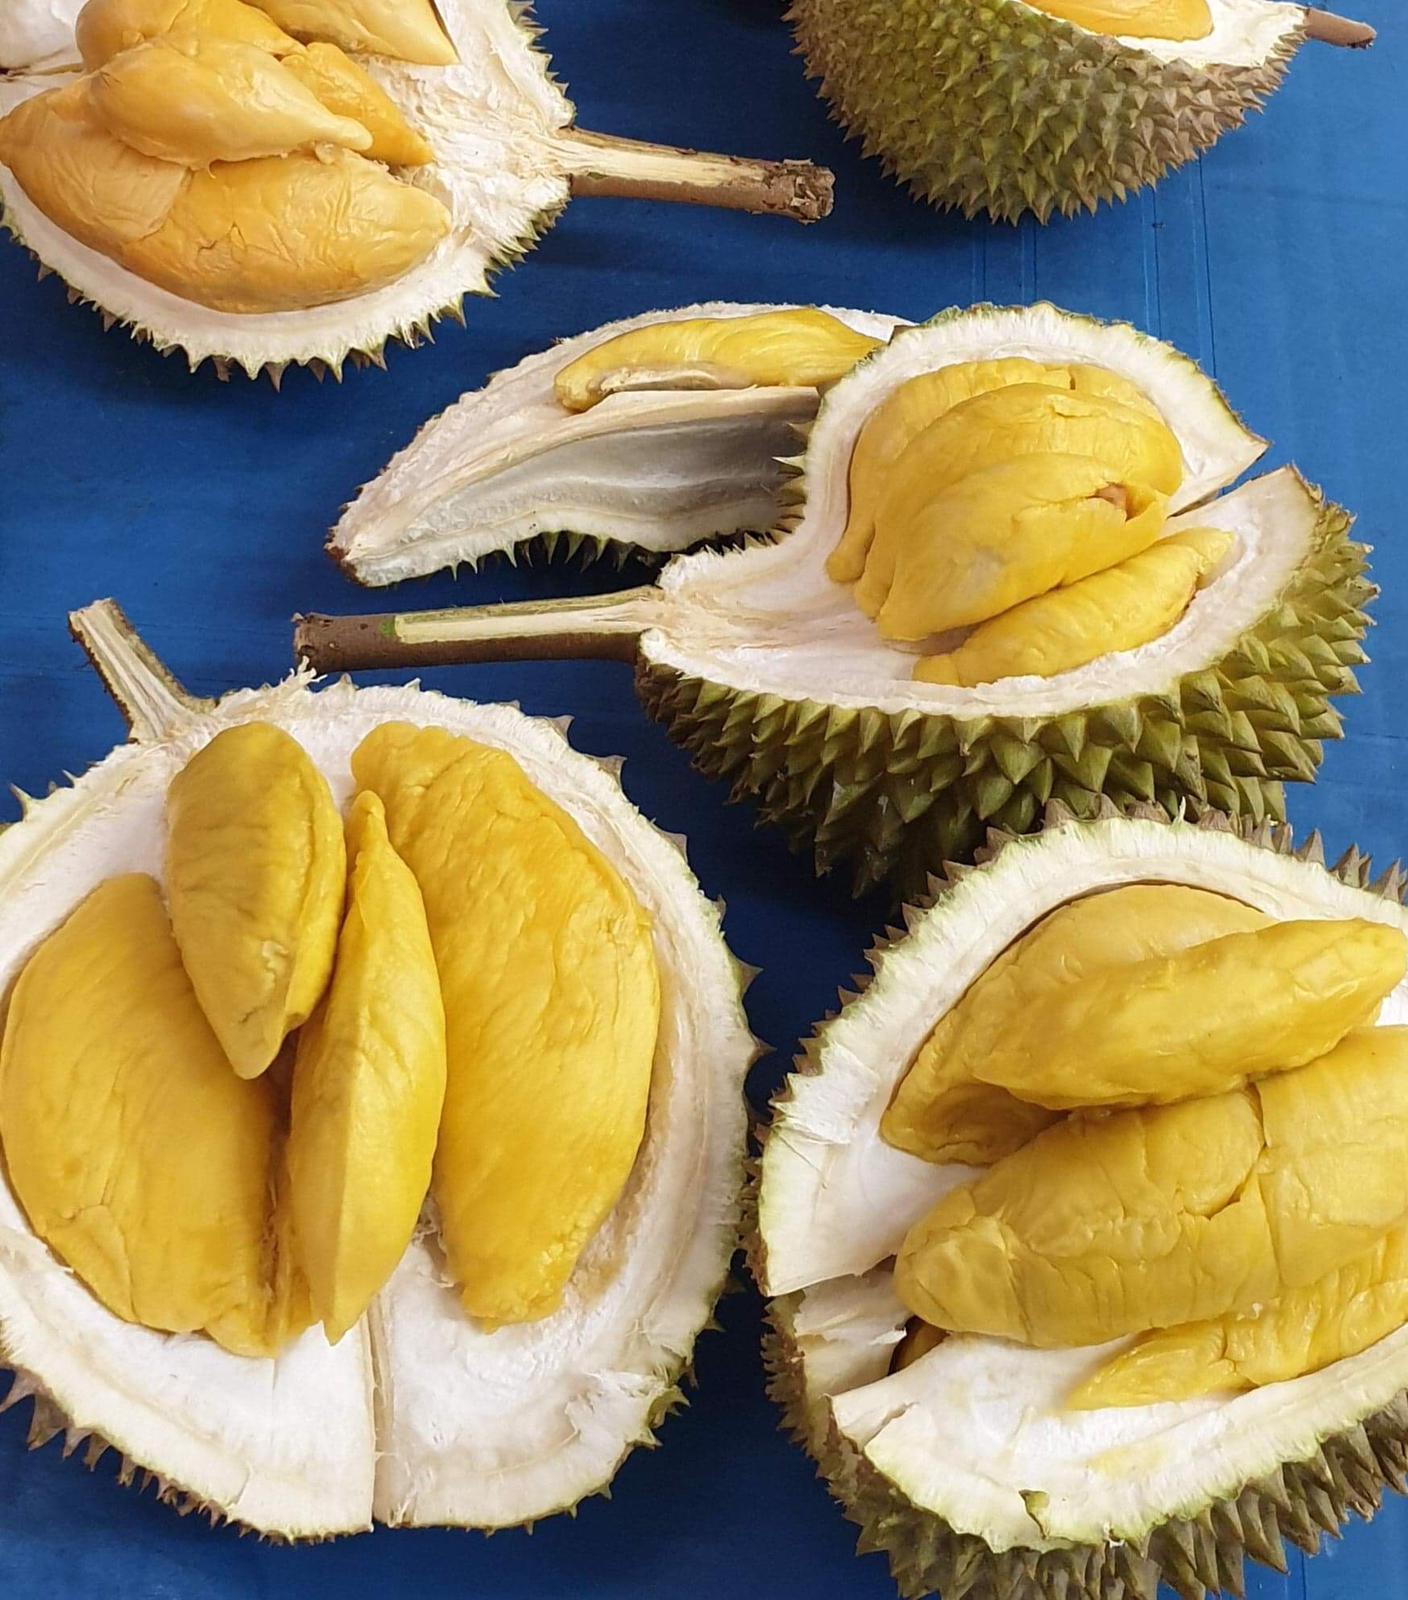 Durian Price Singapore: Types and Pricing Guide